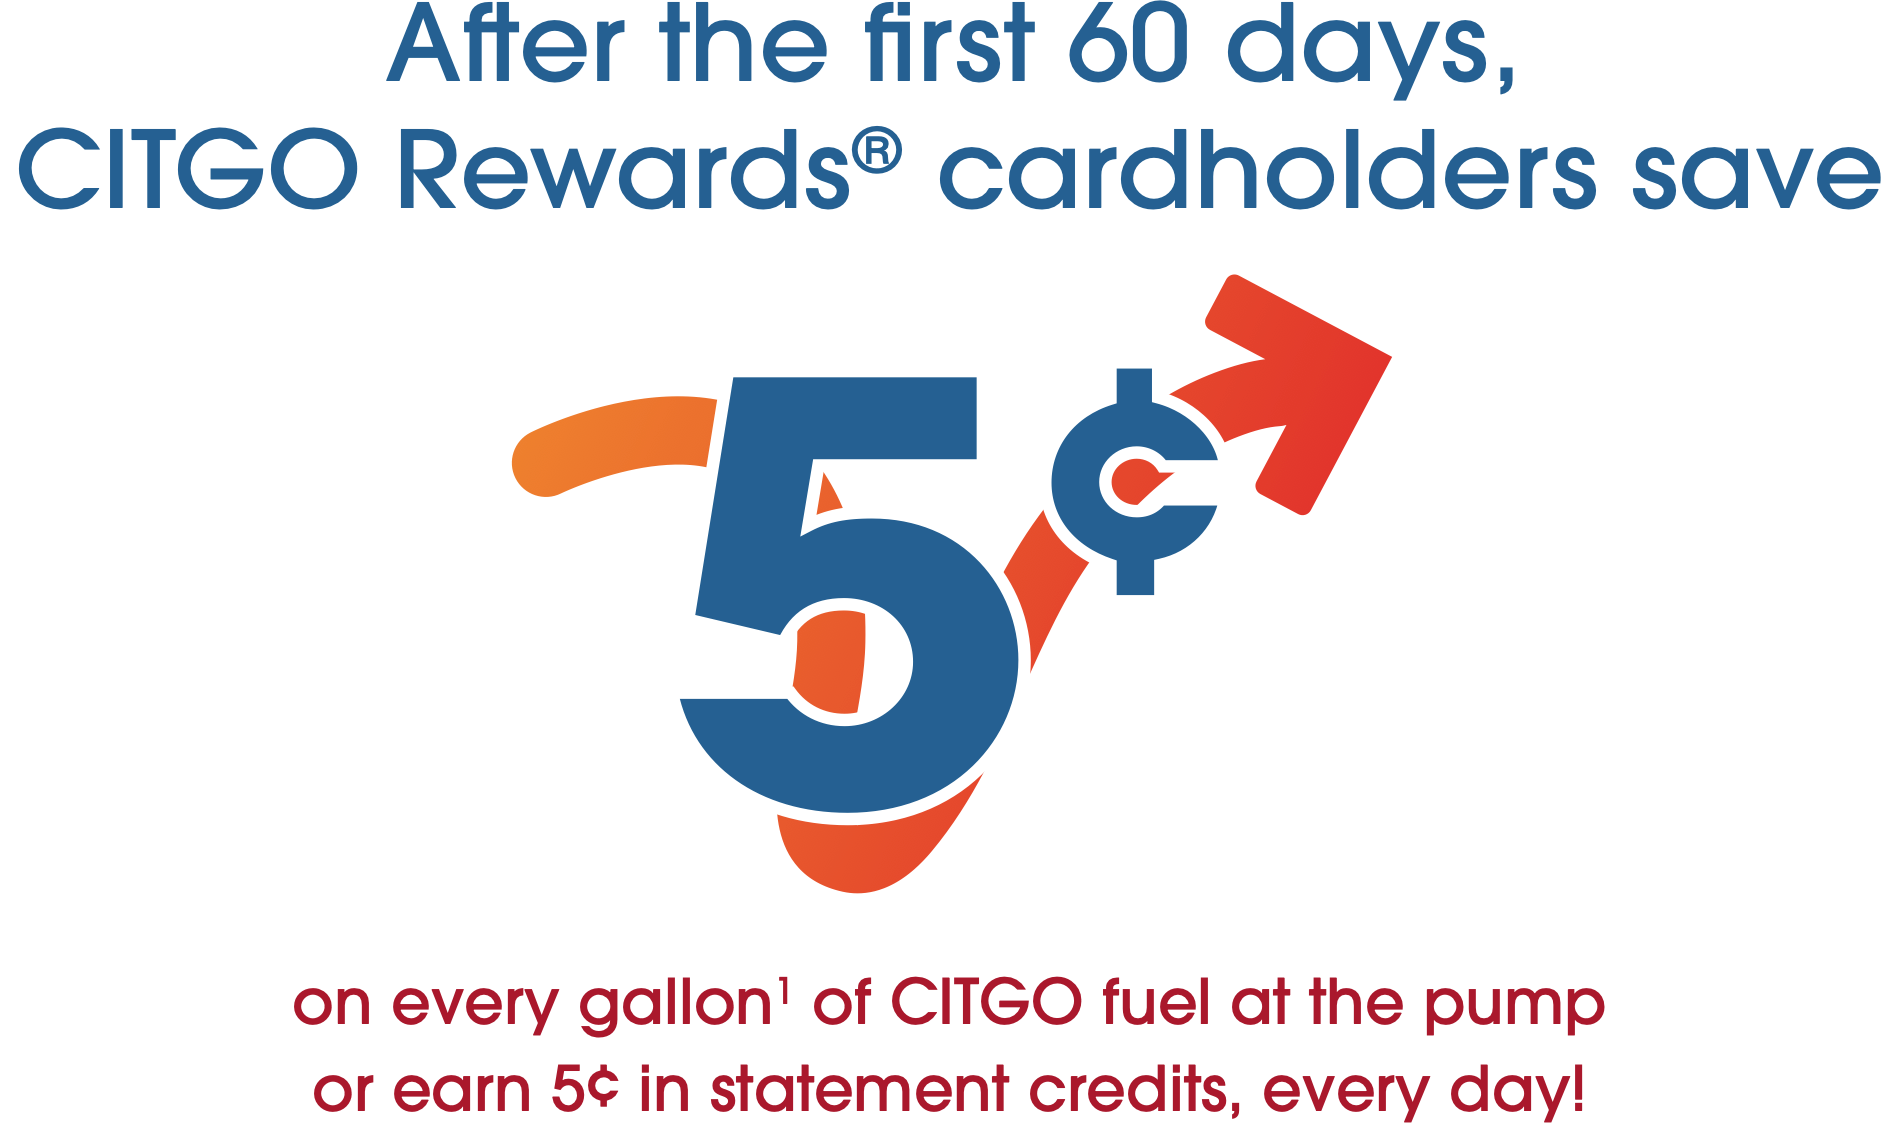 After the first 60 days, CITGO Rewards® cardholders save 5¢ on every gallon(1) of CITGO fuel at the pump or earn 5¢ in statement credits, every day!